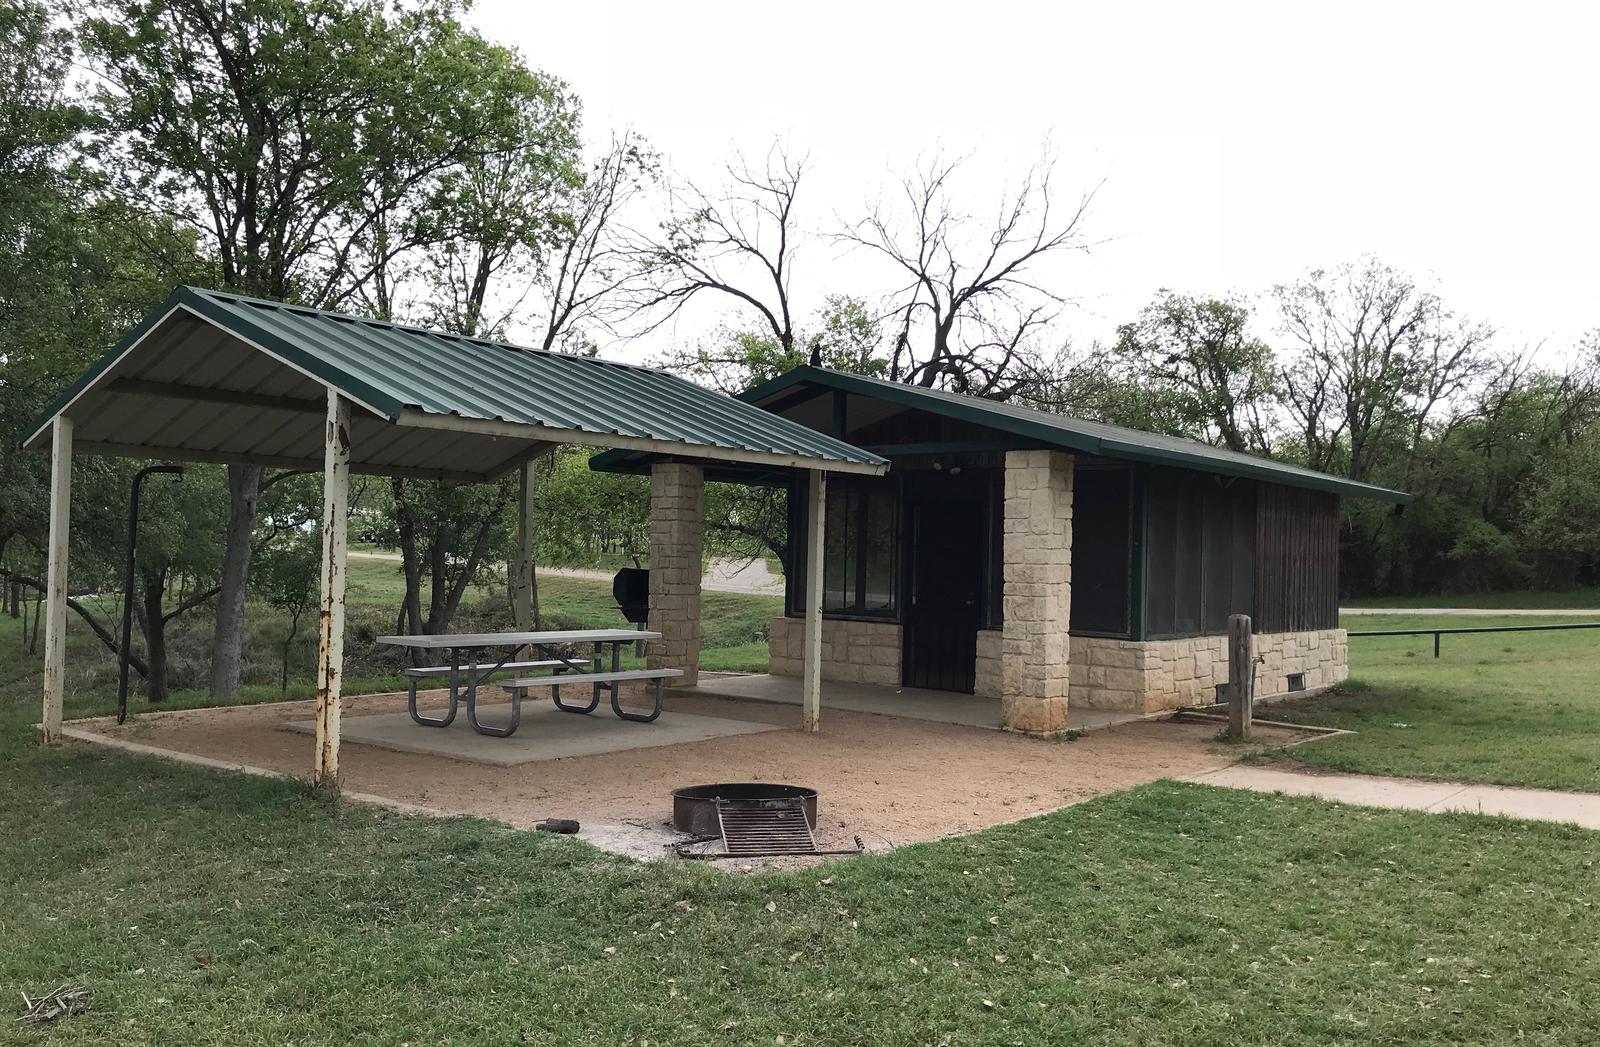 Screen shelter with covered picnic table, grill, and fire ring